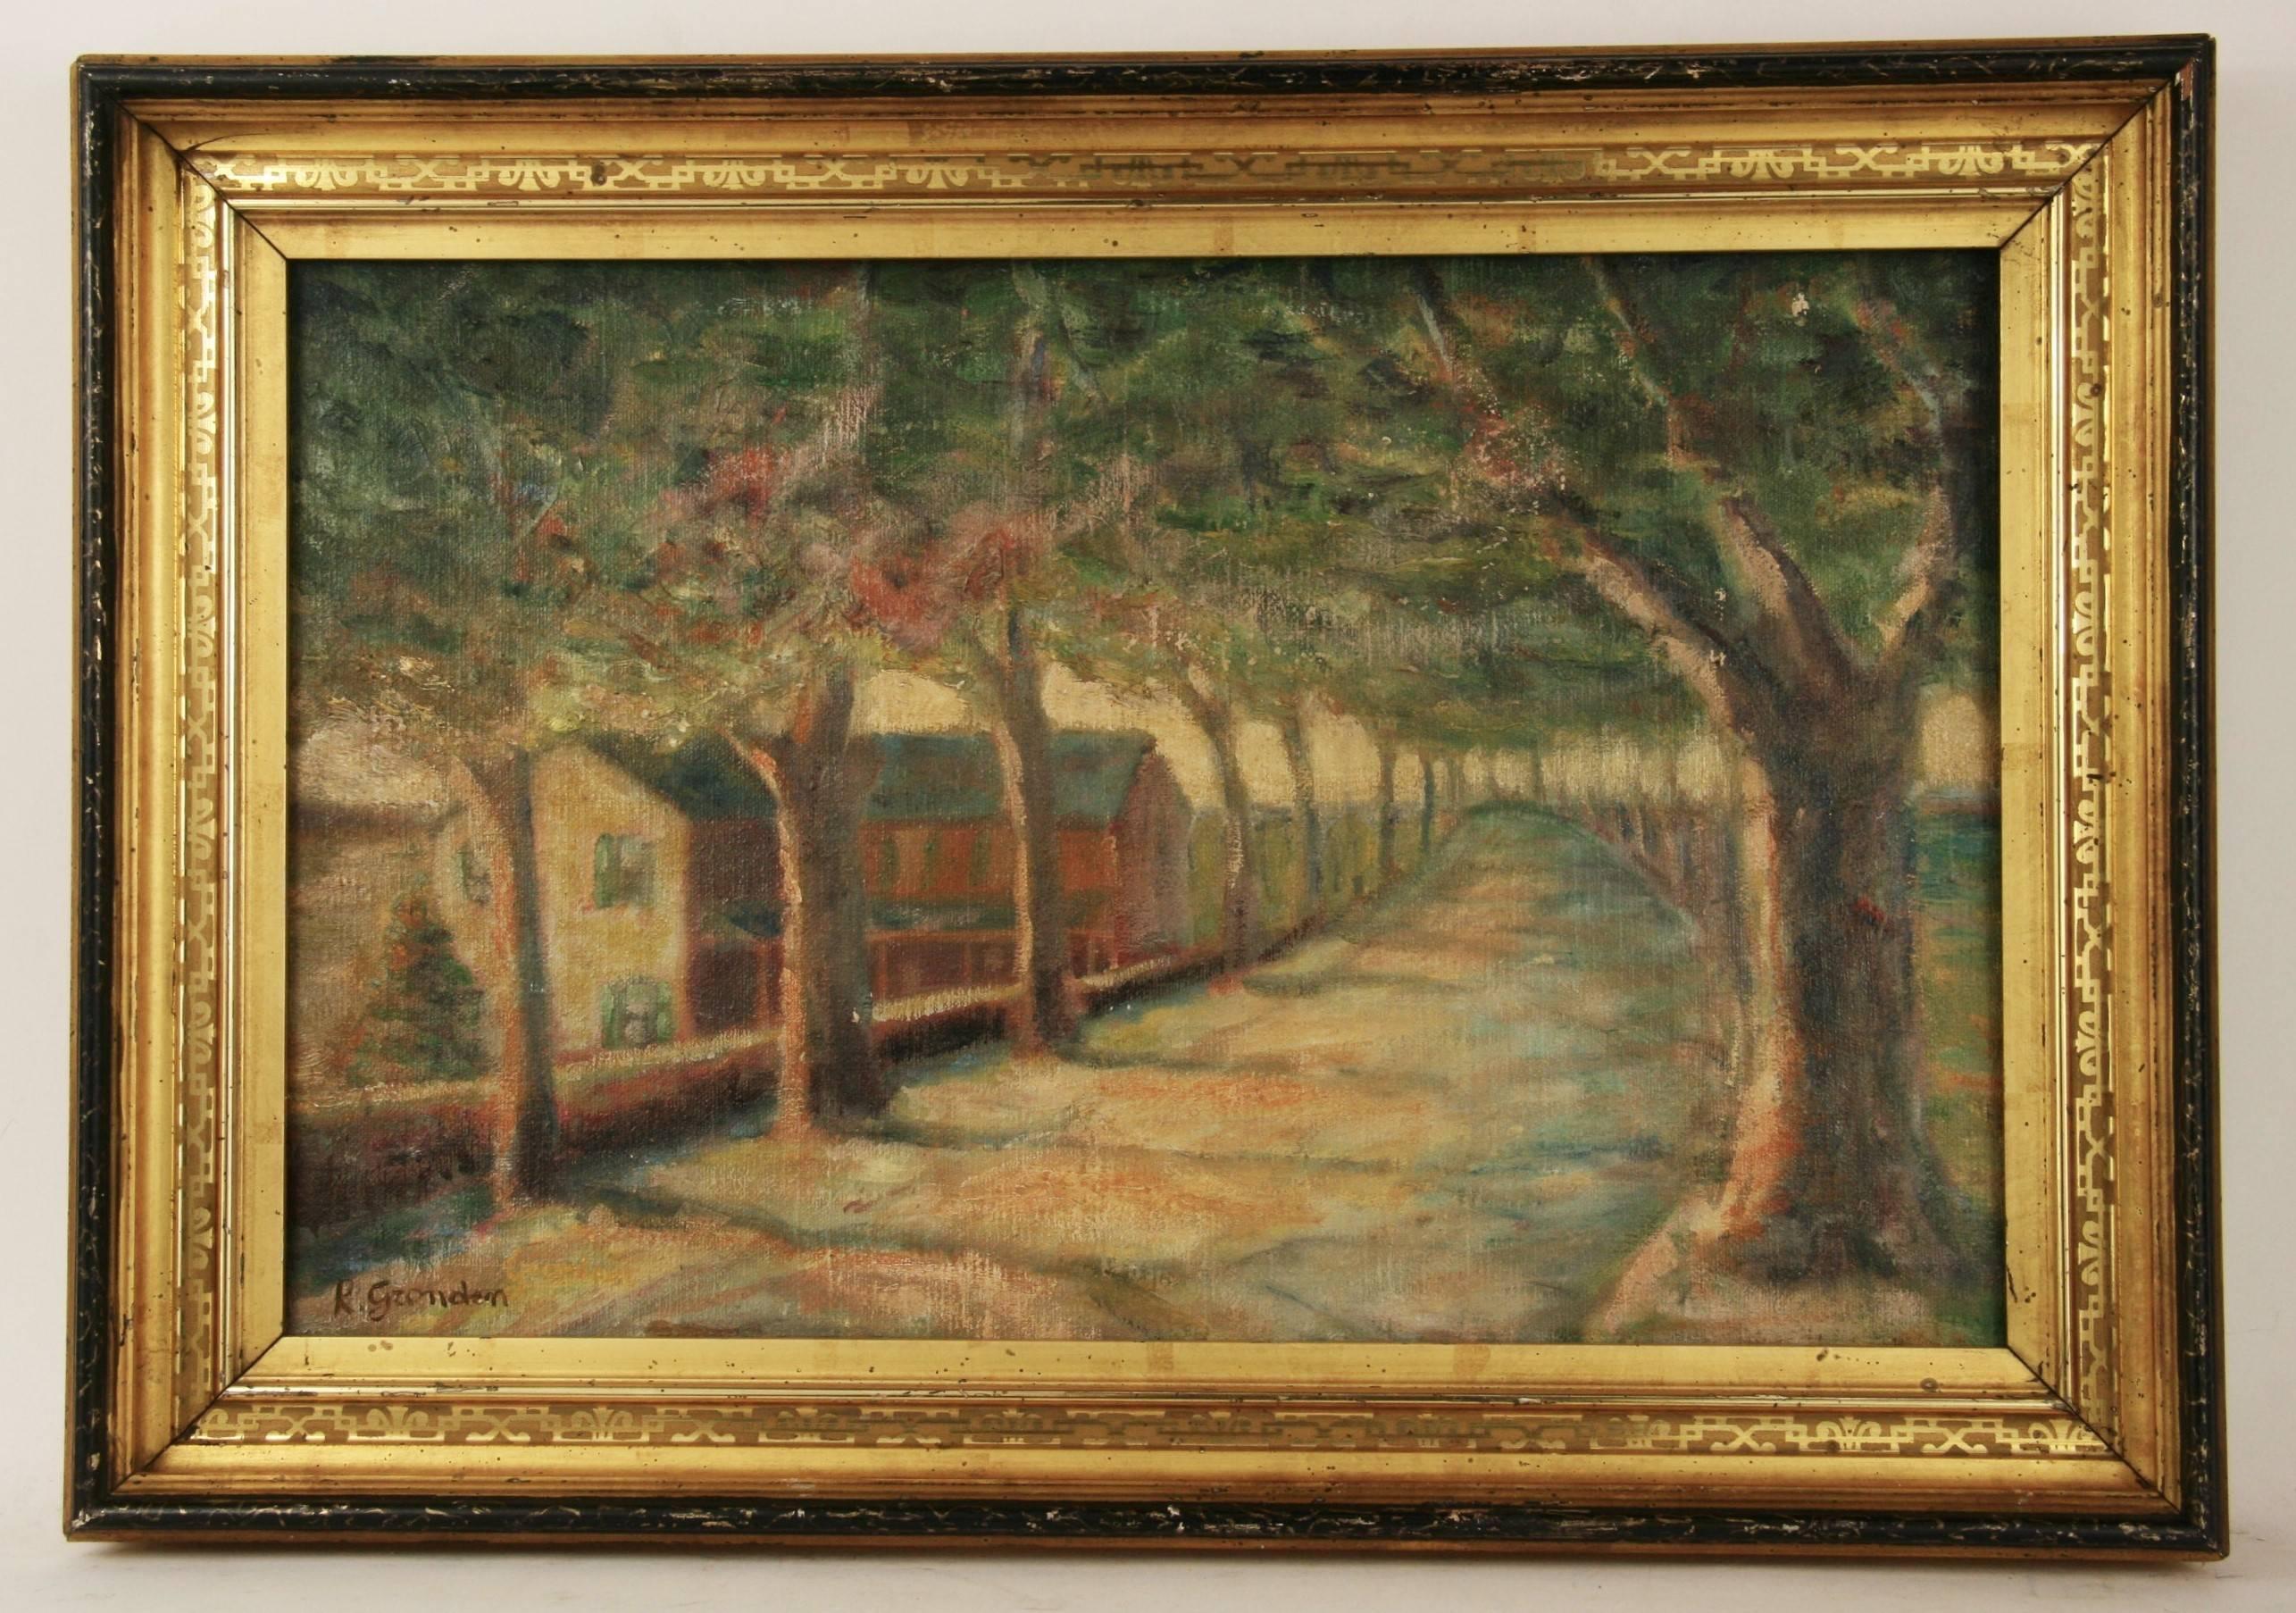 #5-2755   Provence ,France,impressionist style landscape,  oil on artist board ,diplayed in a 19th century  finely gilt-black wood frame 
,Signed lower left by G.Gronden.
Image size 11H x 17 5 W